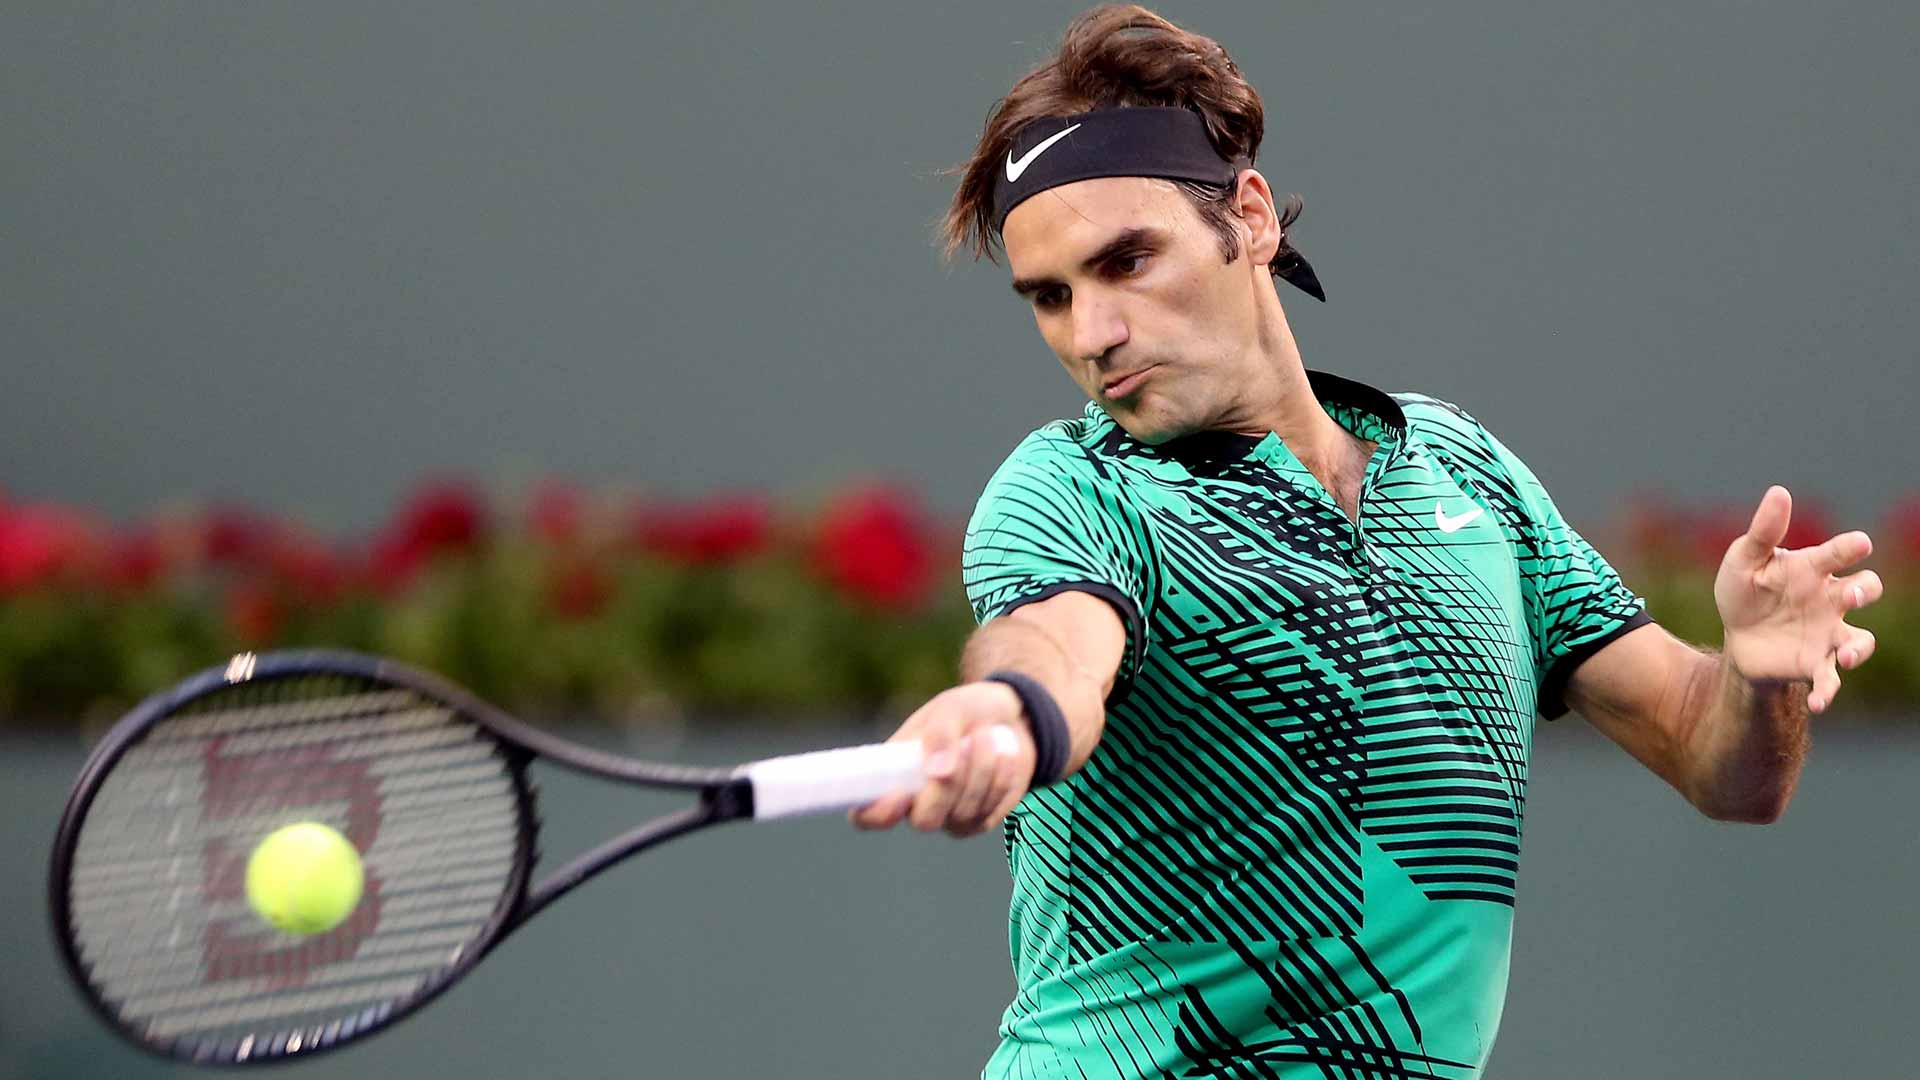 Roger Federer takes the opening set against Rafael Nadal with two breaks of serve.